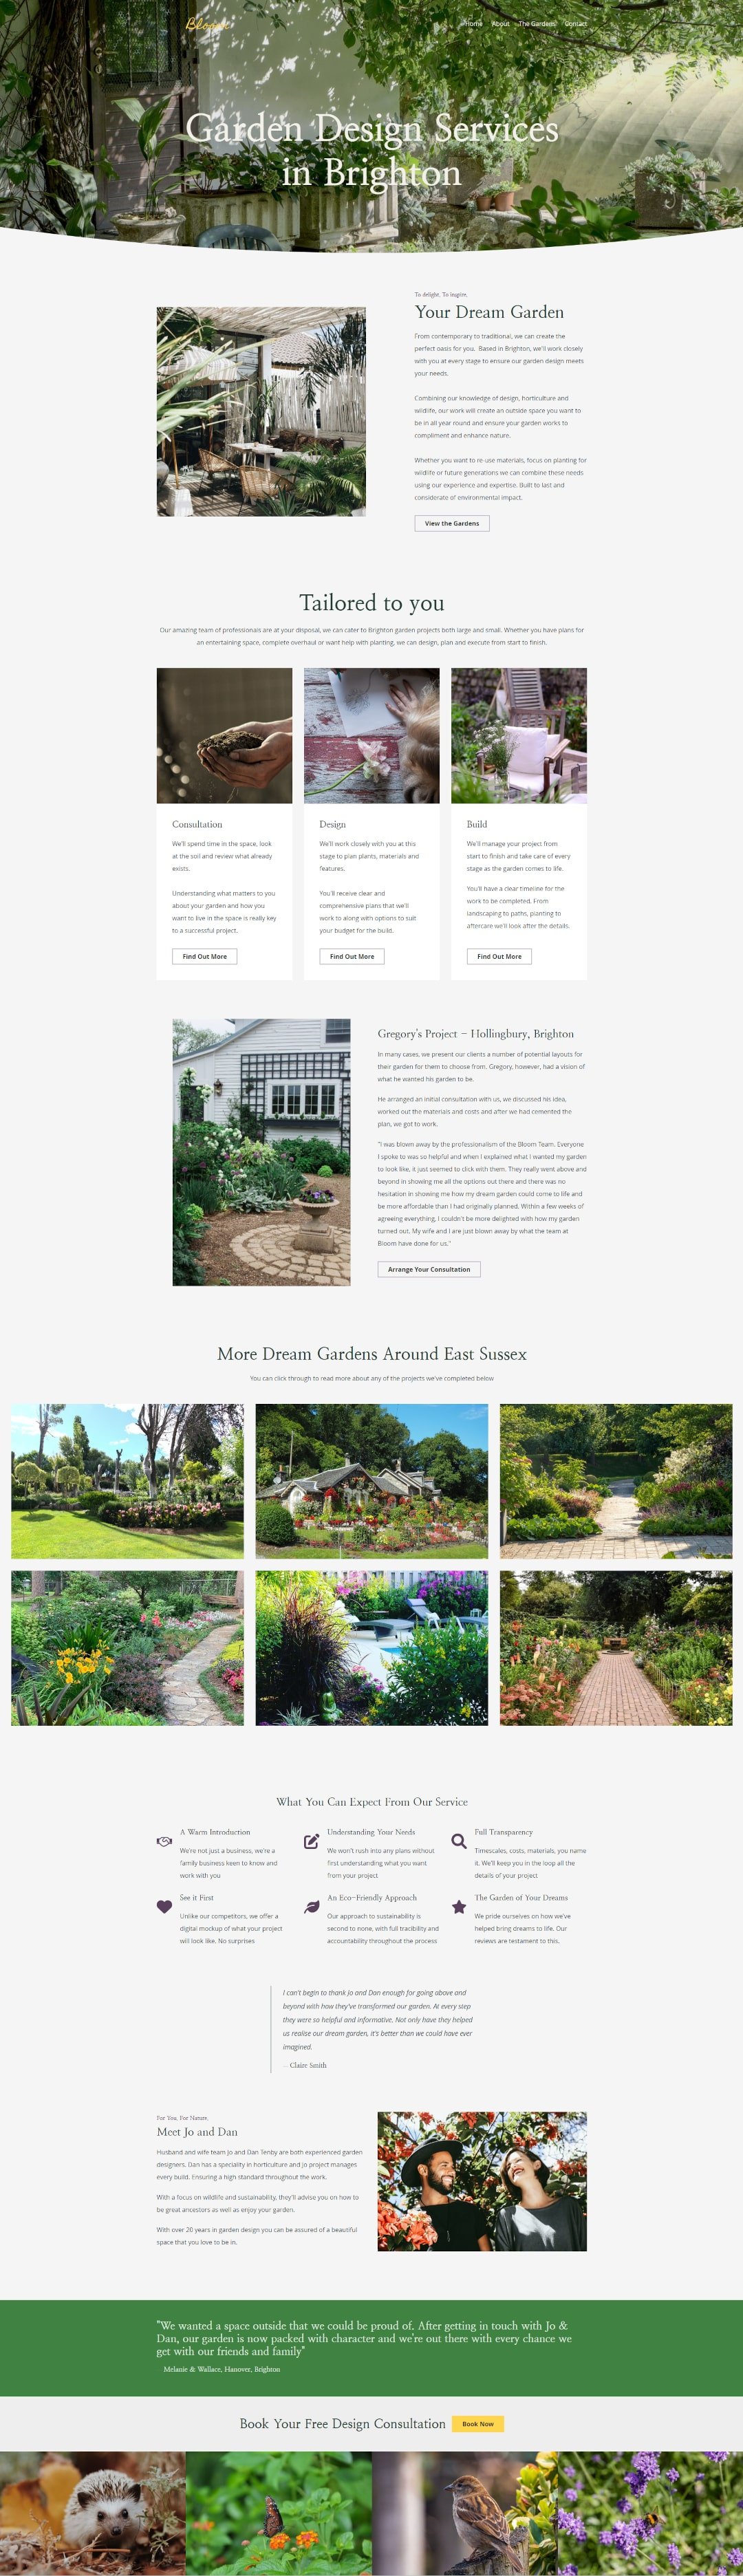 A landing page designed to target people looking for a gardening service in Brighton